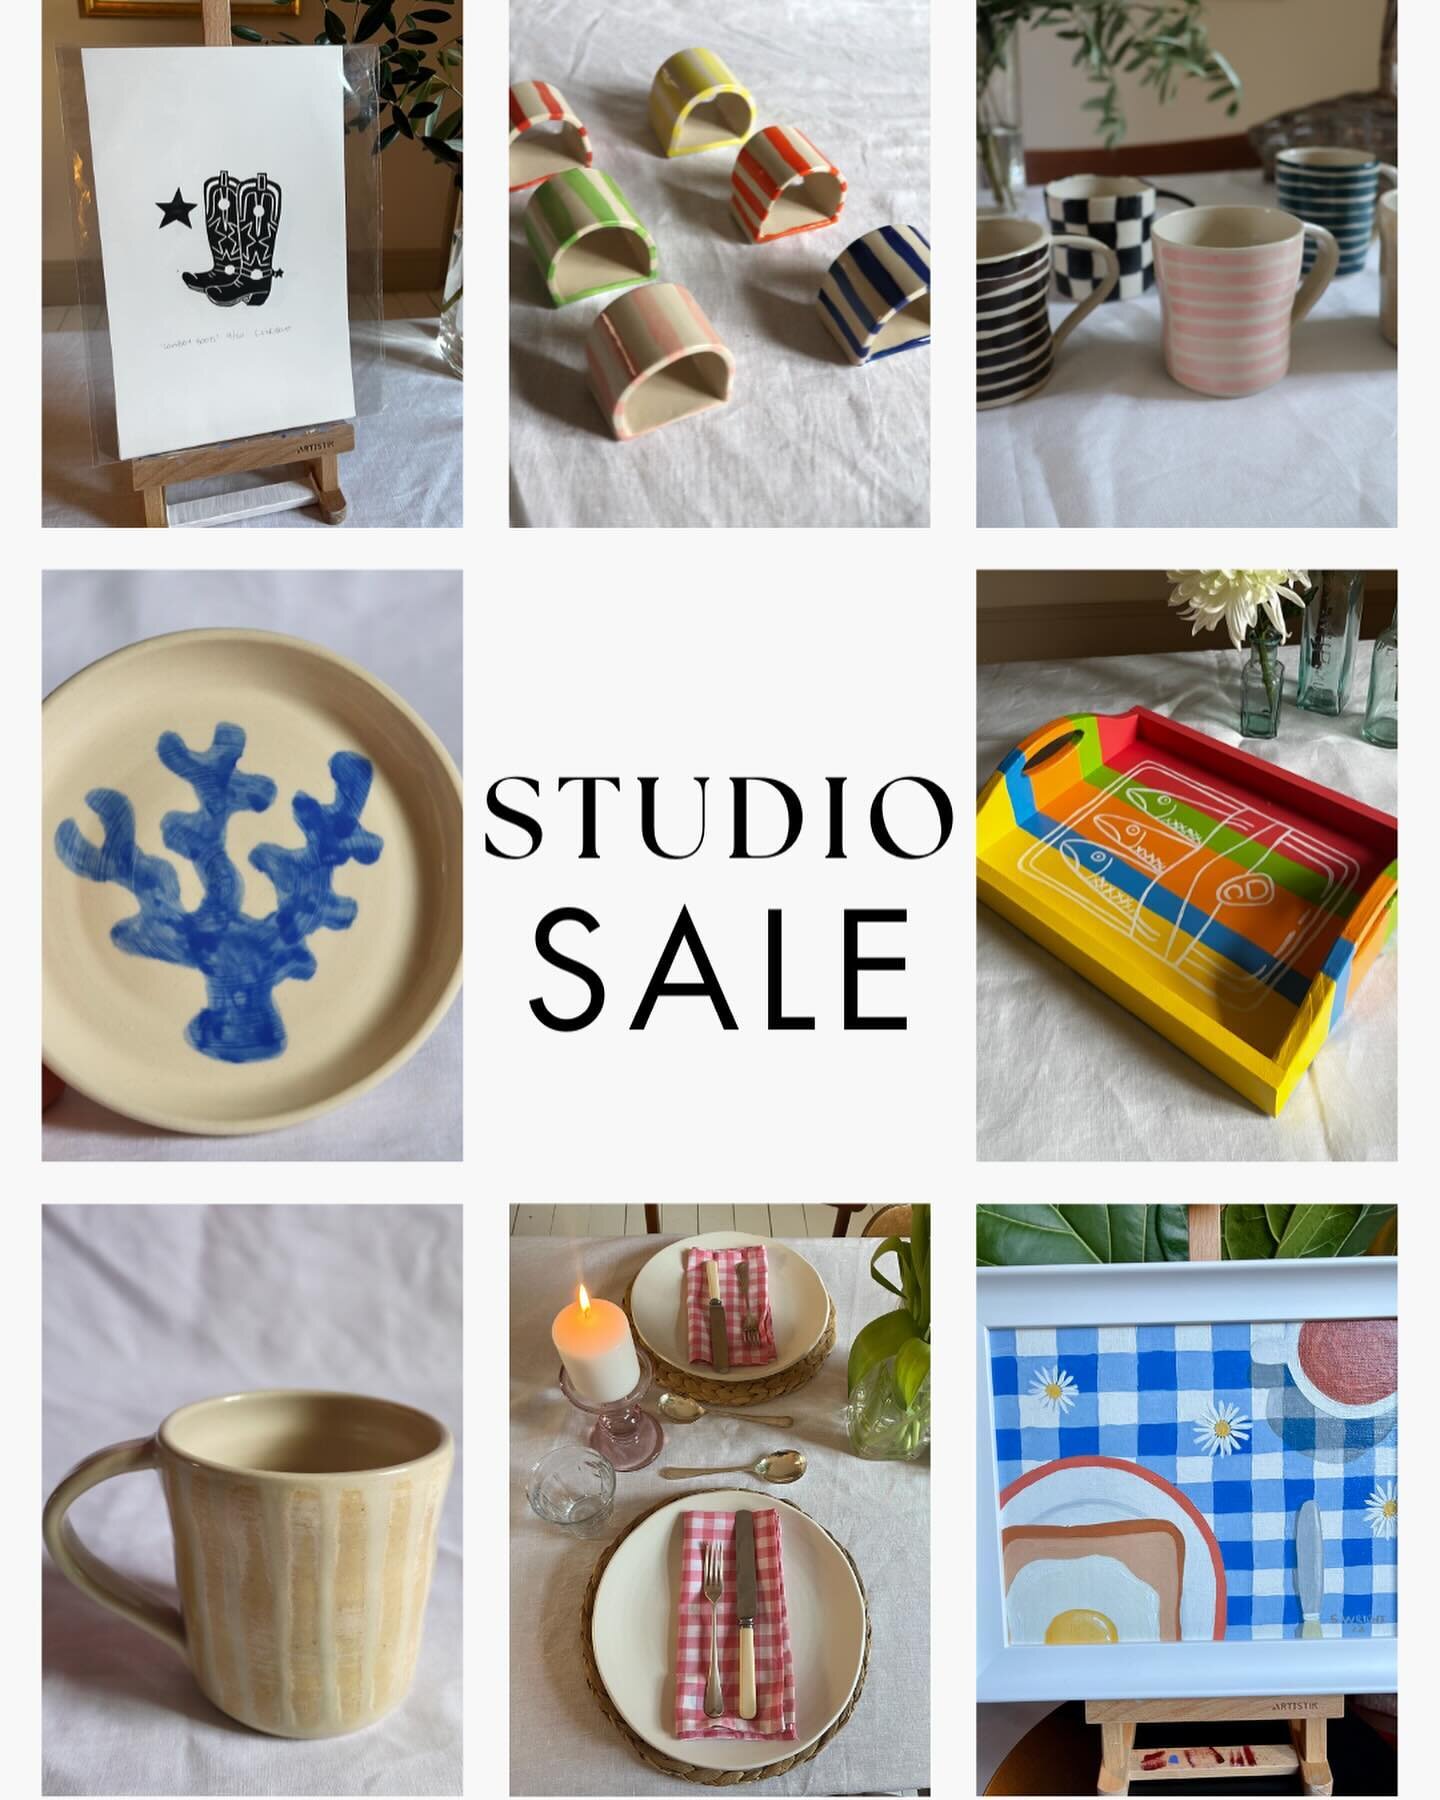 Good old instagram algorithm only sharing my stories to 75 people 🫠 so here I am one final time sharing this final studio sale! Sale prices are only available here - so DM me. Final date for delivery is Monday the 18th and then I&rsquo;m off to chil